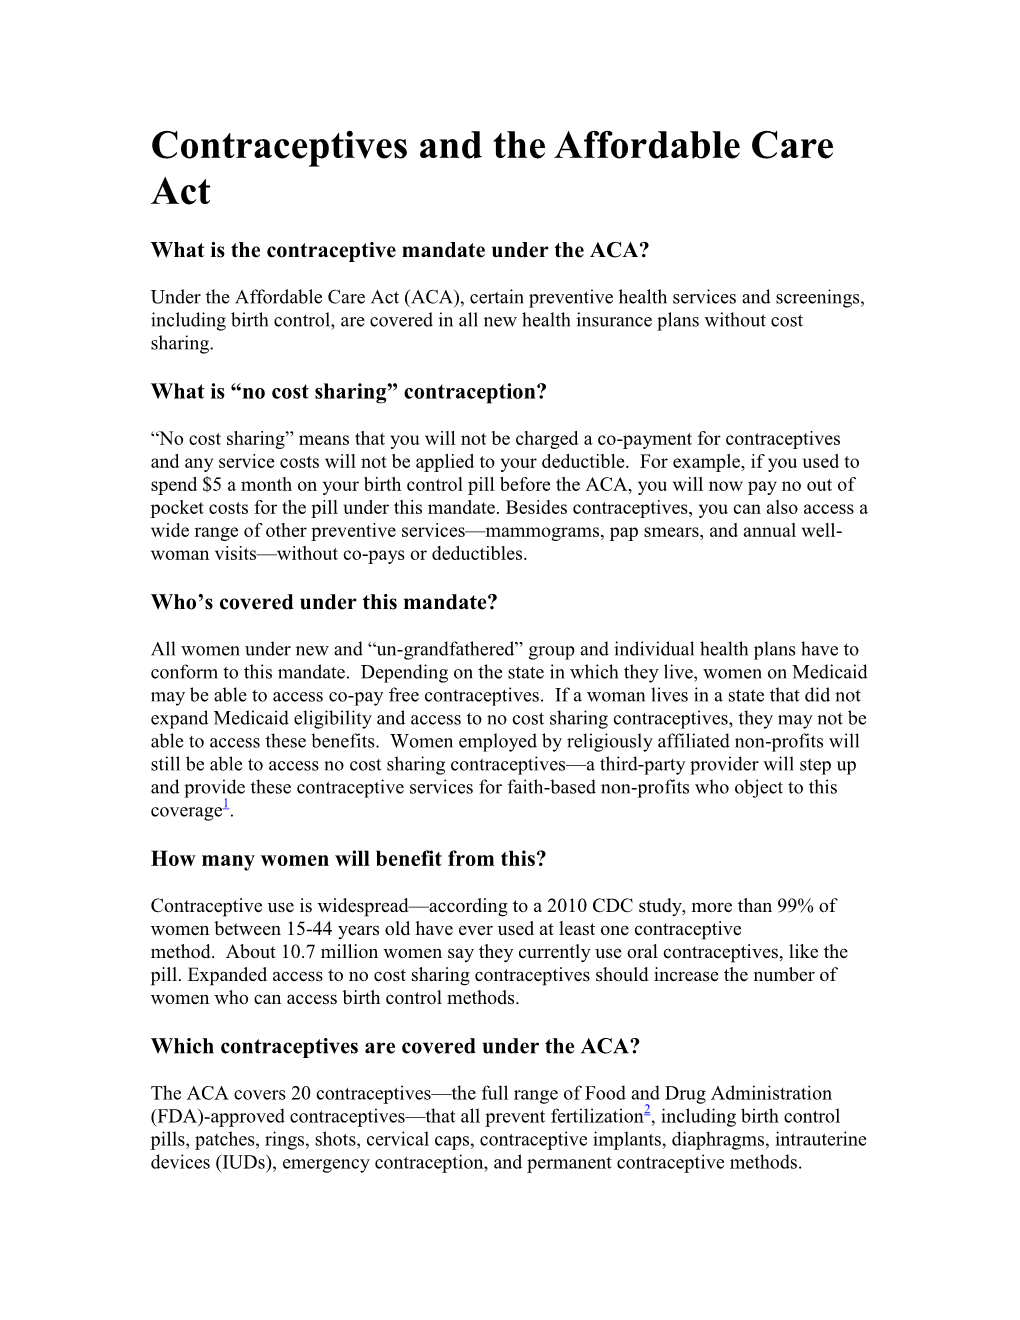 Contraceptives and the Affordable Care Act